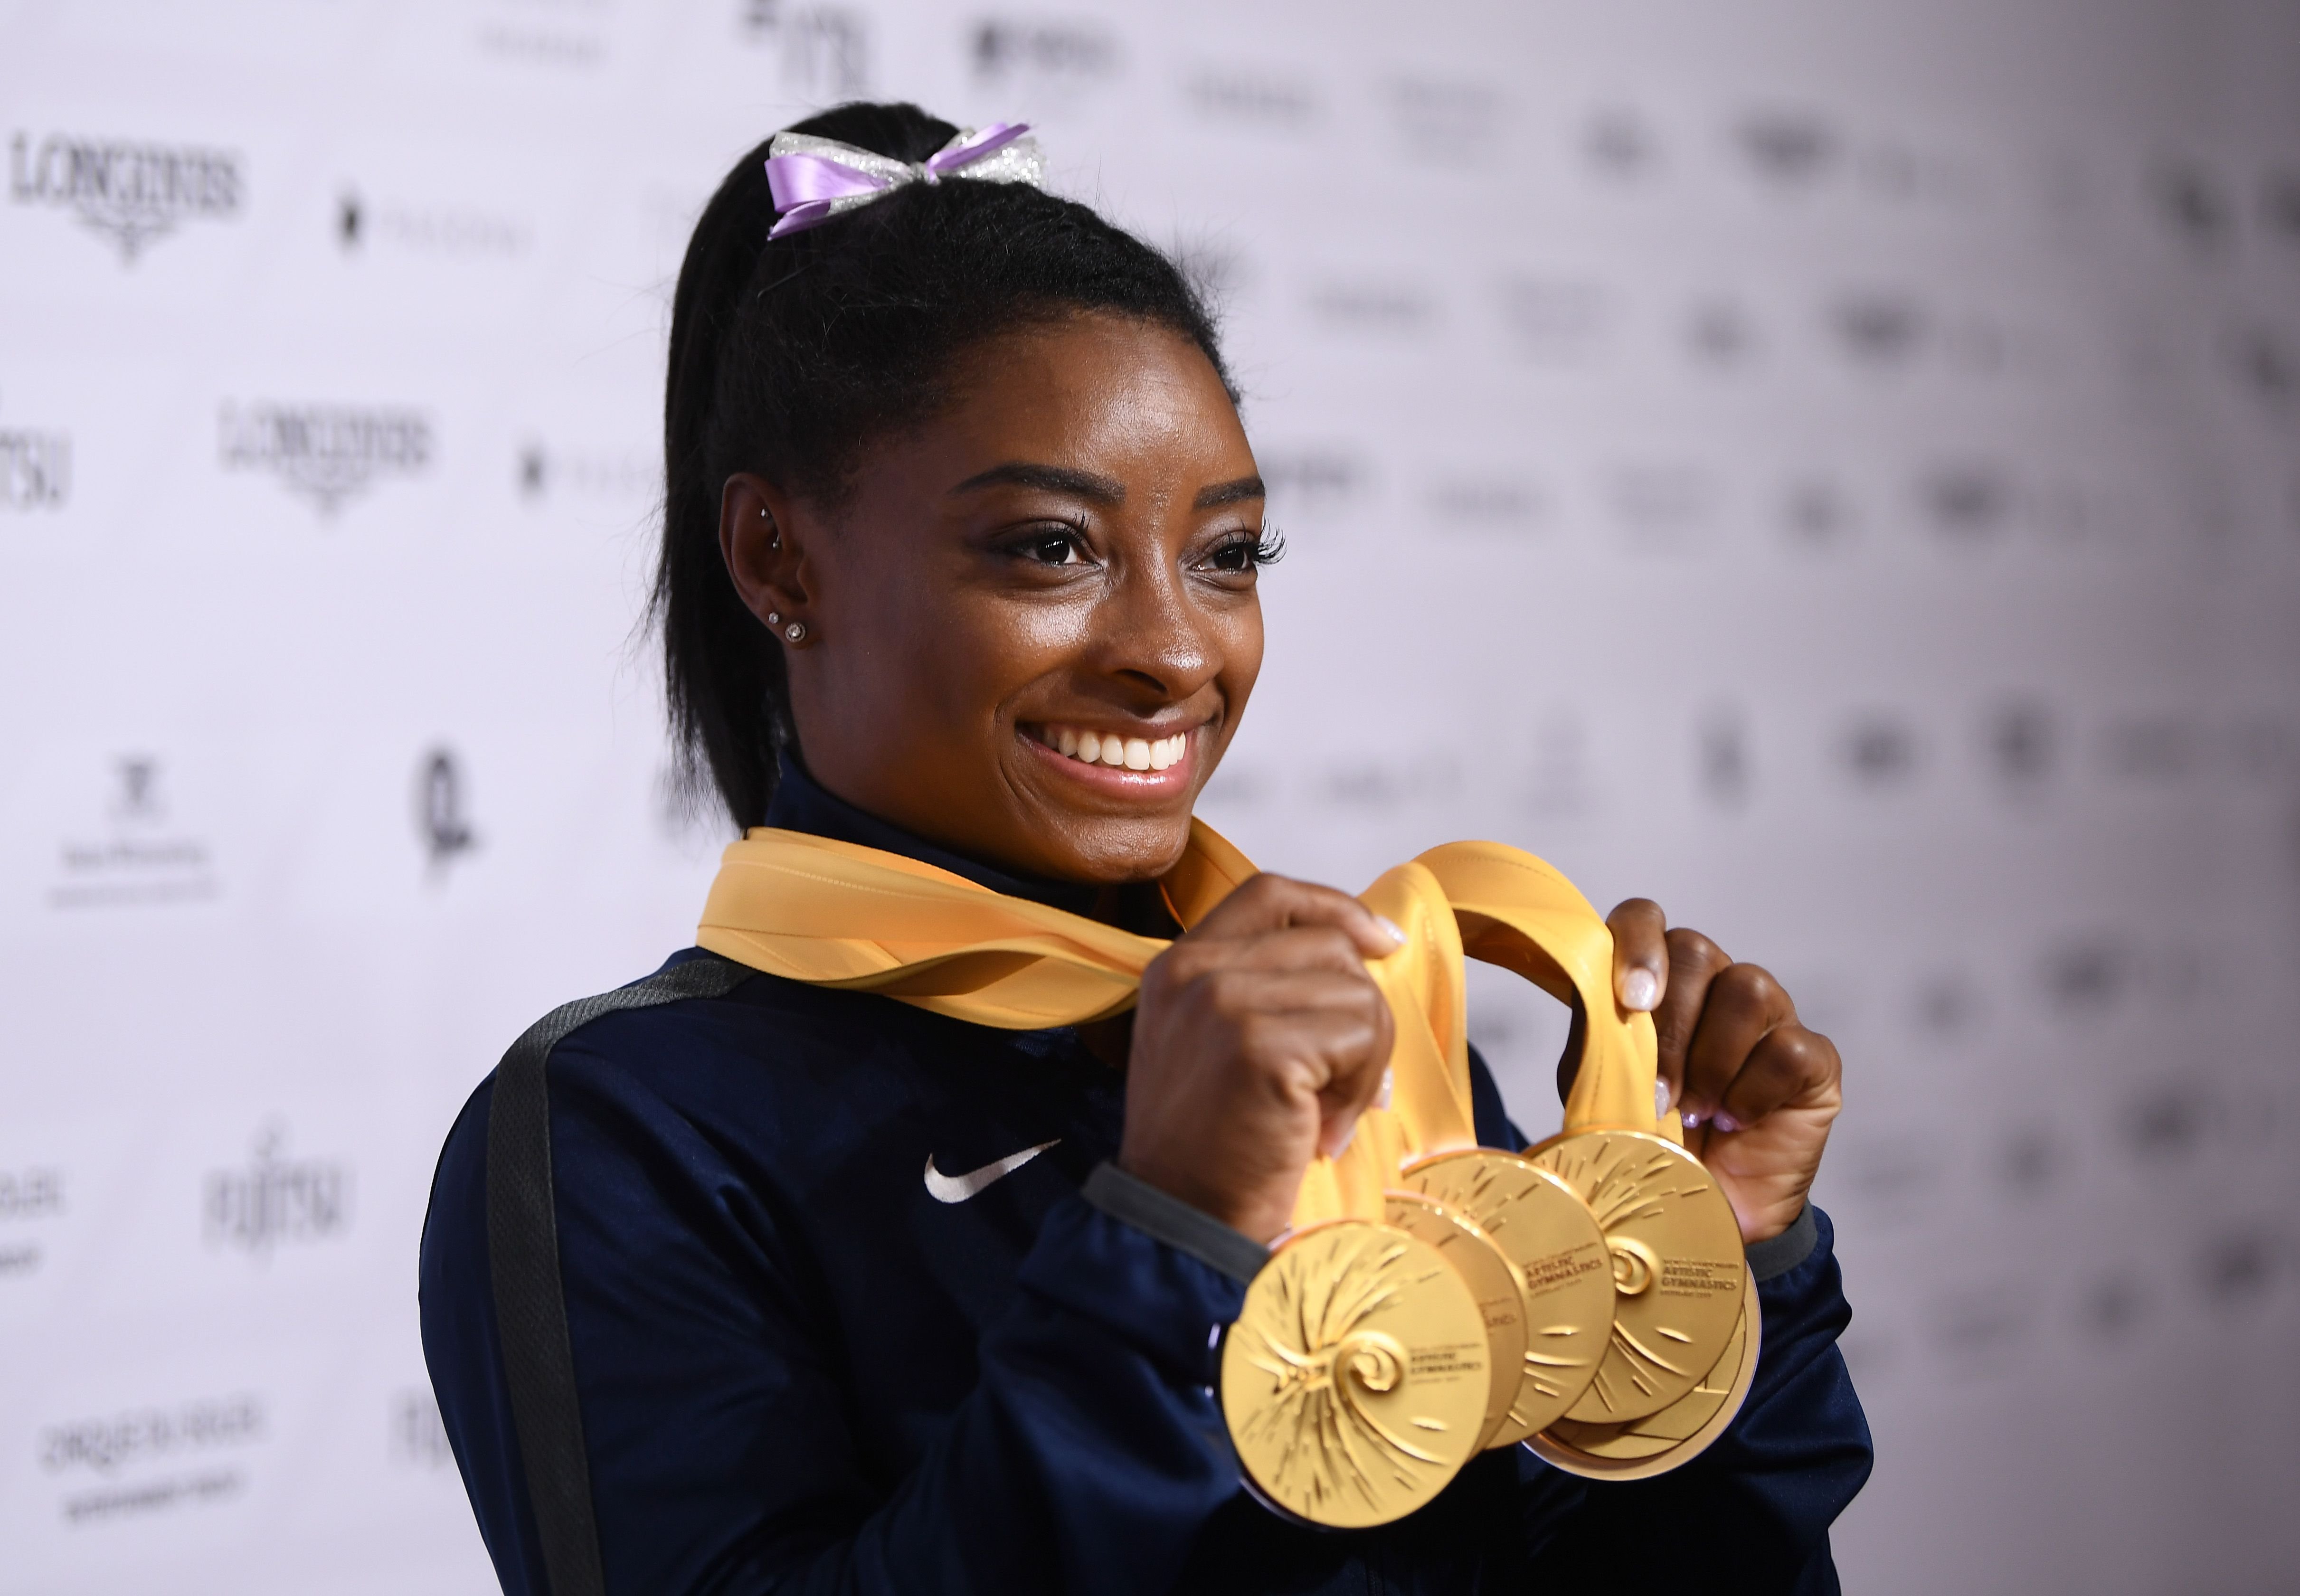 Simone Biles at the FIG Artistic Gymnastics World Championships in Stuttgart, Germany in 2019 | Source: Getty Images